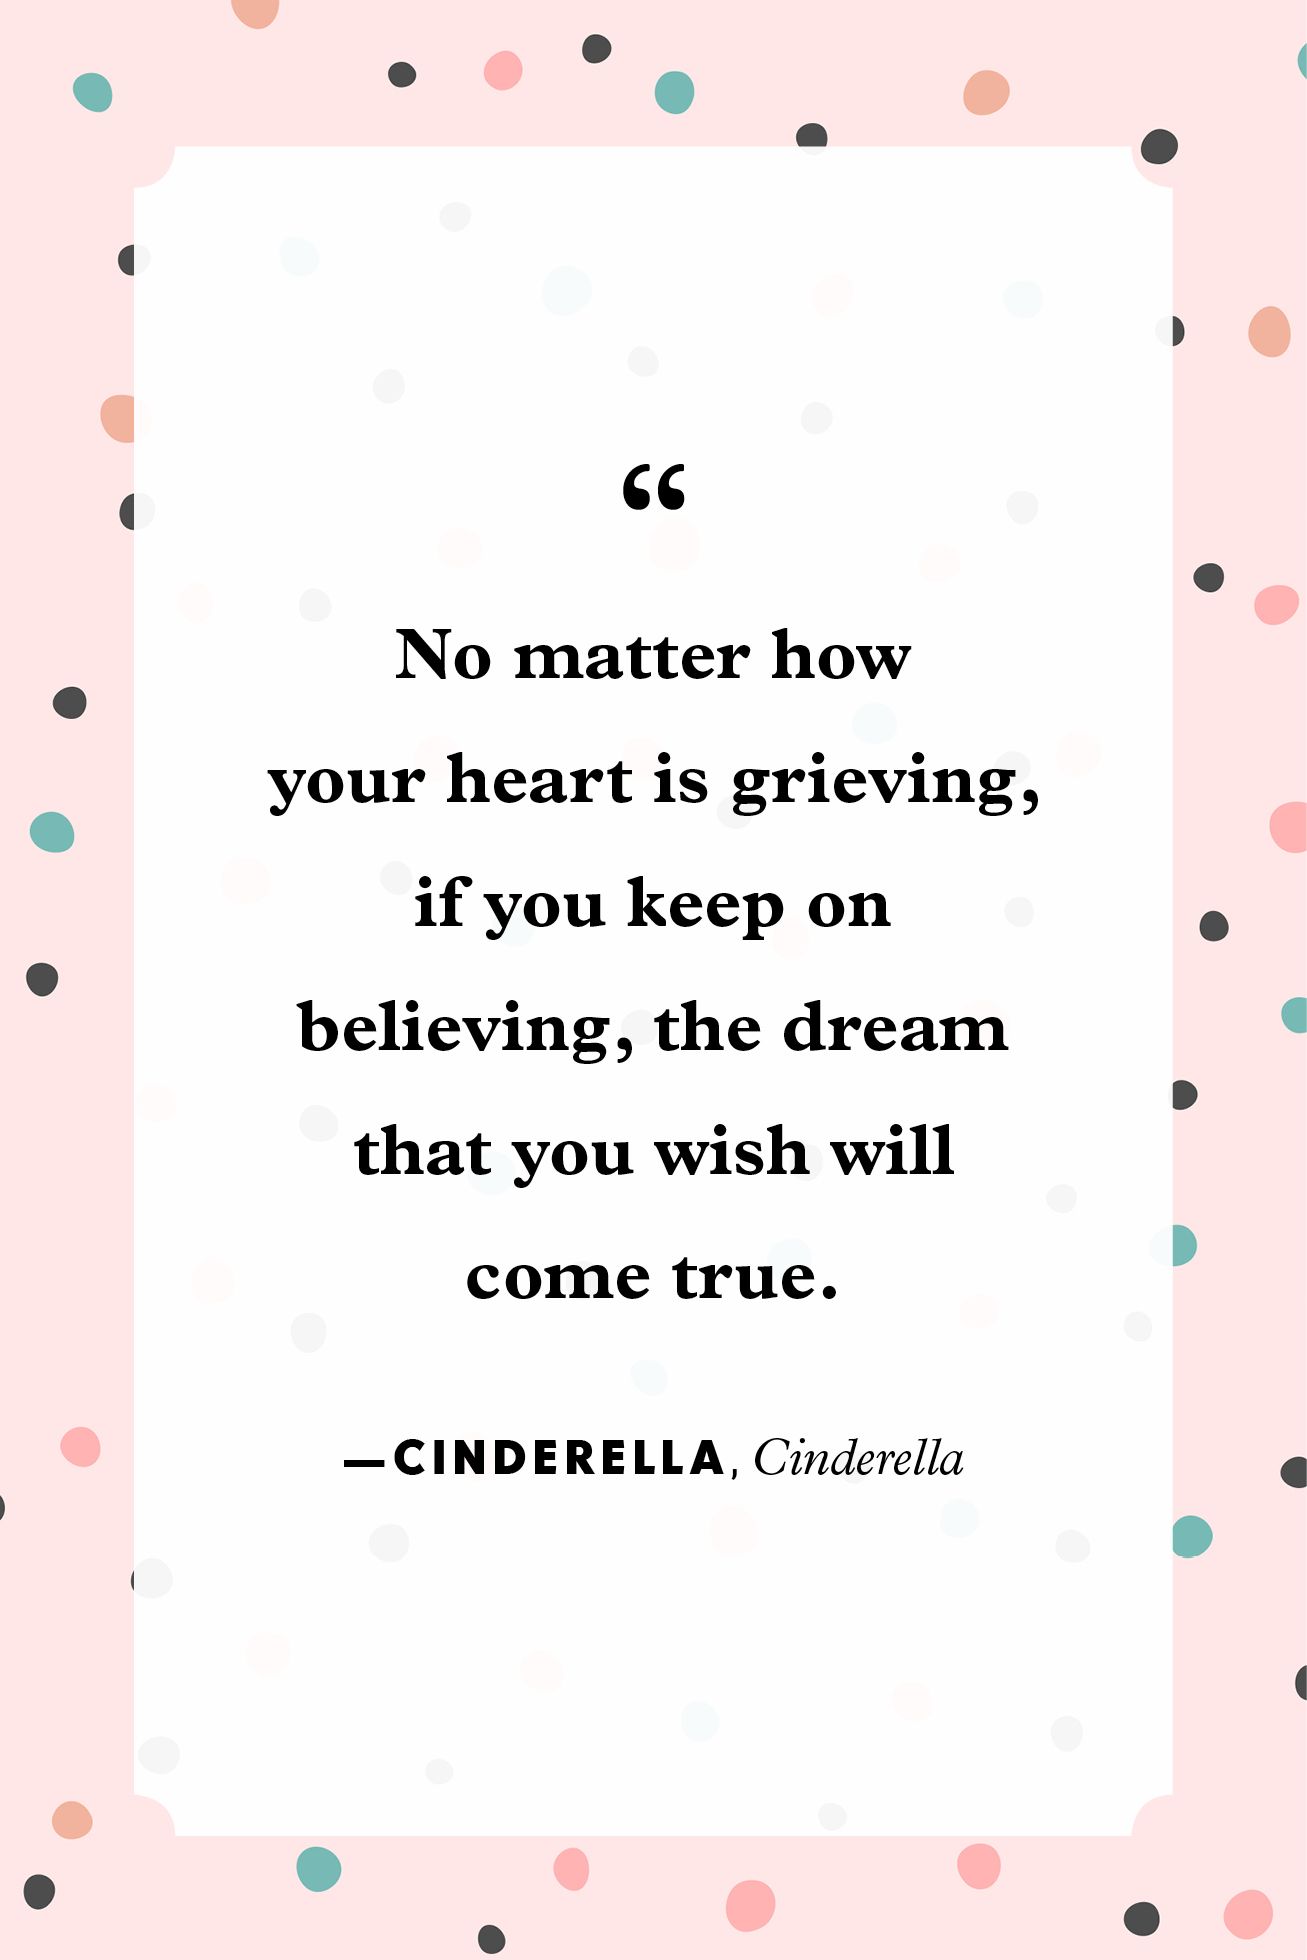 quotes from disney movies about life